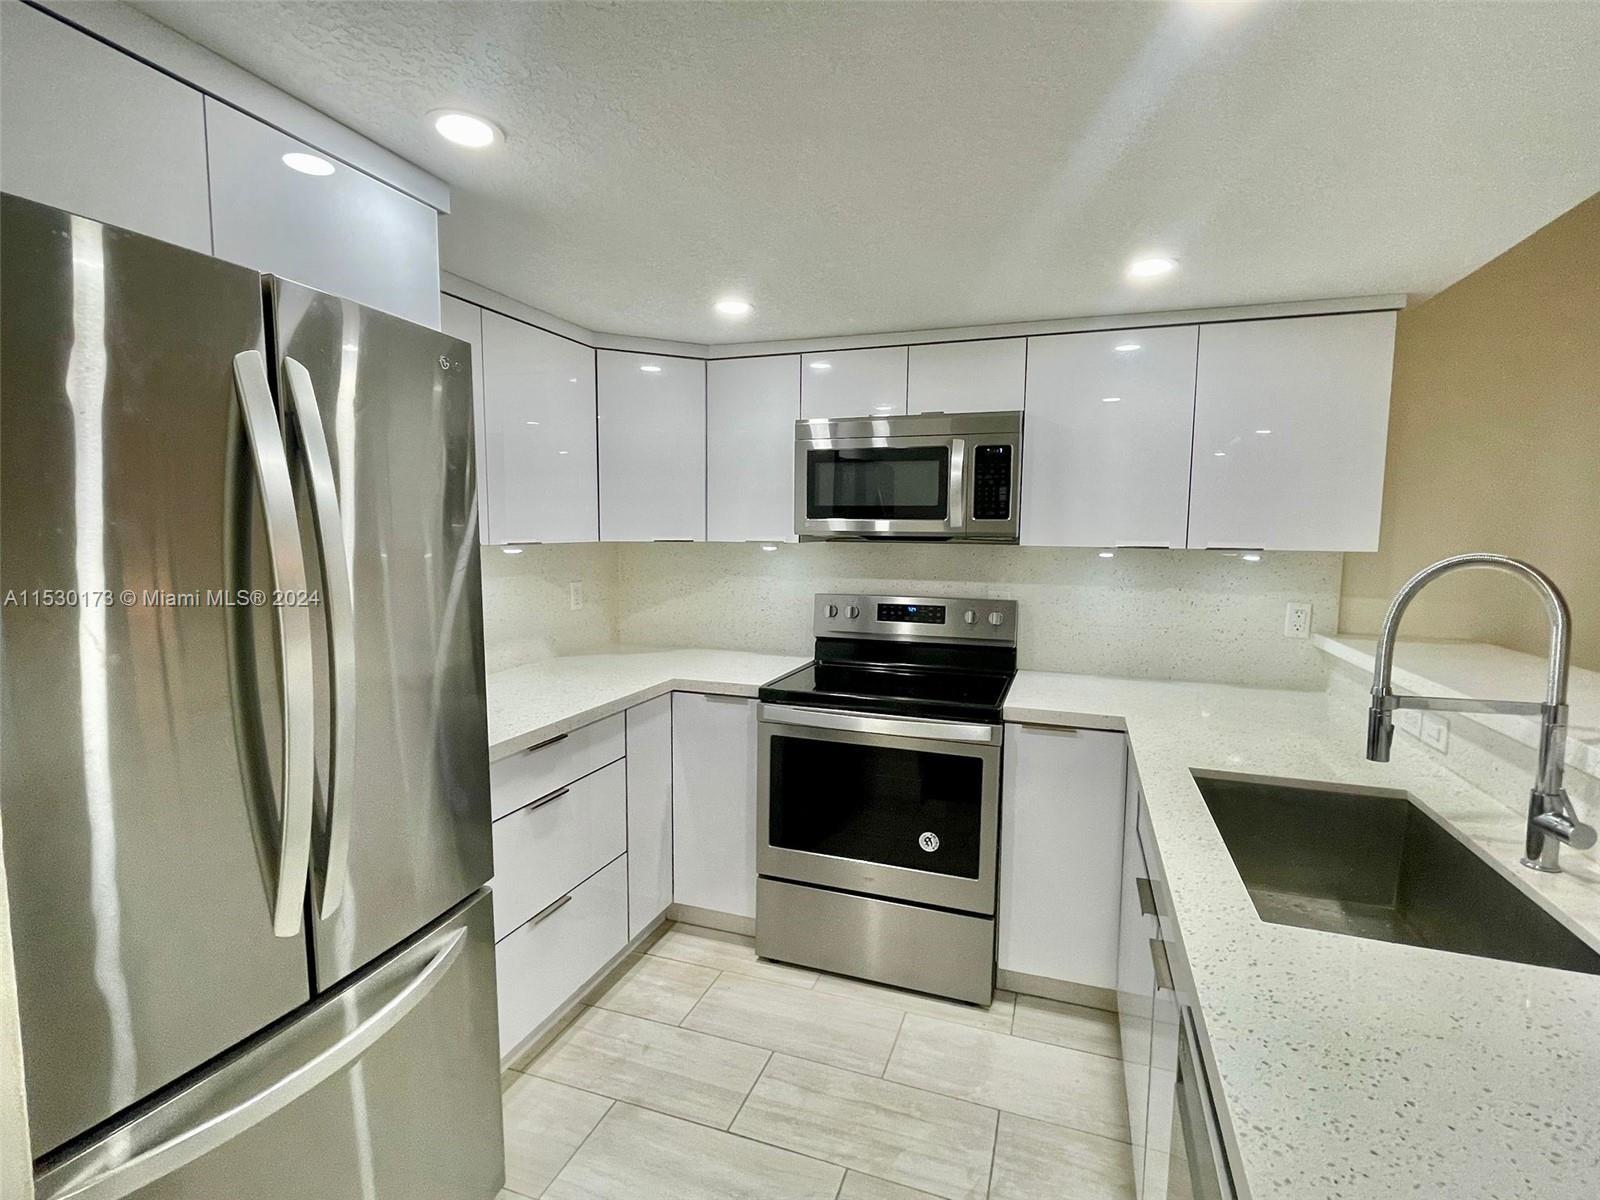 Motivated Seller who's relocating out of State! FULLY REMODELED!! 2 BEDROOMS/ 2 BATHROOMS. CORNER UN